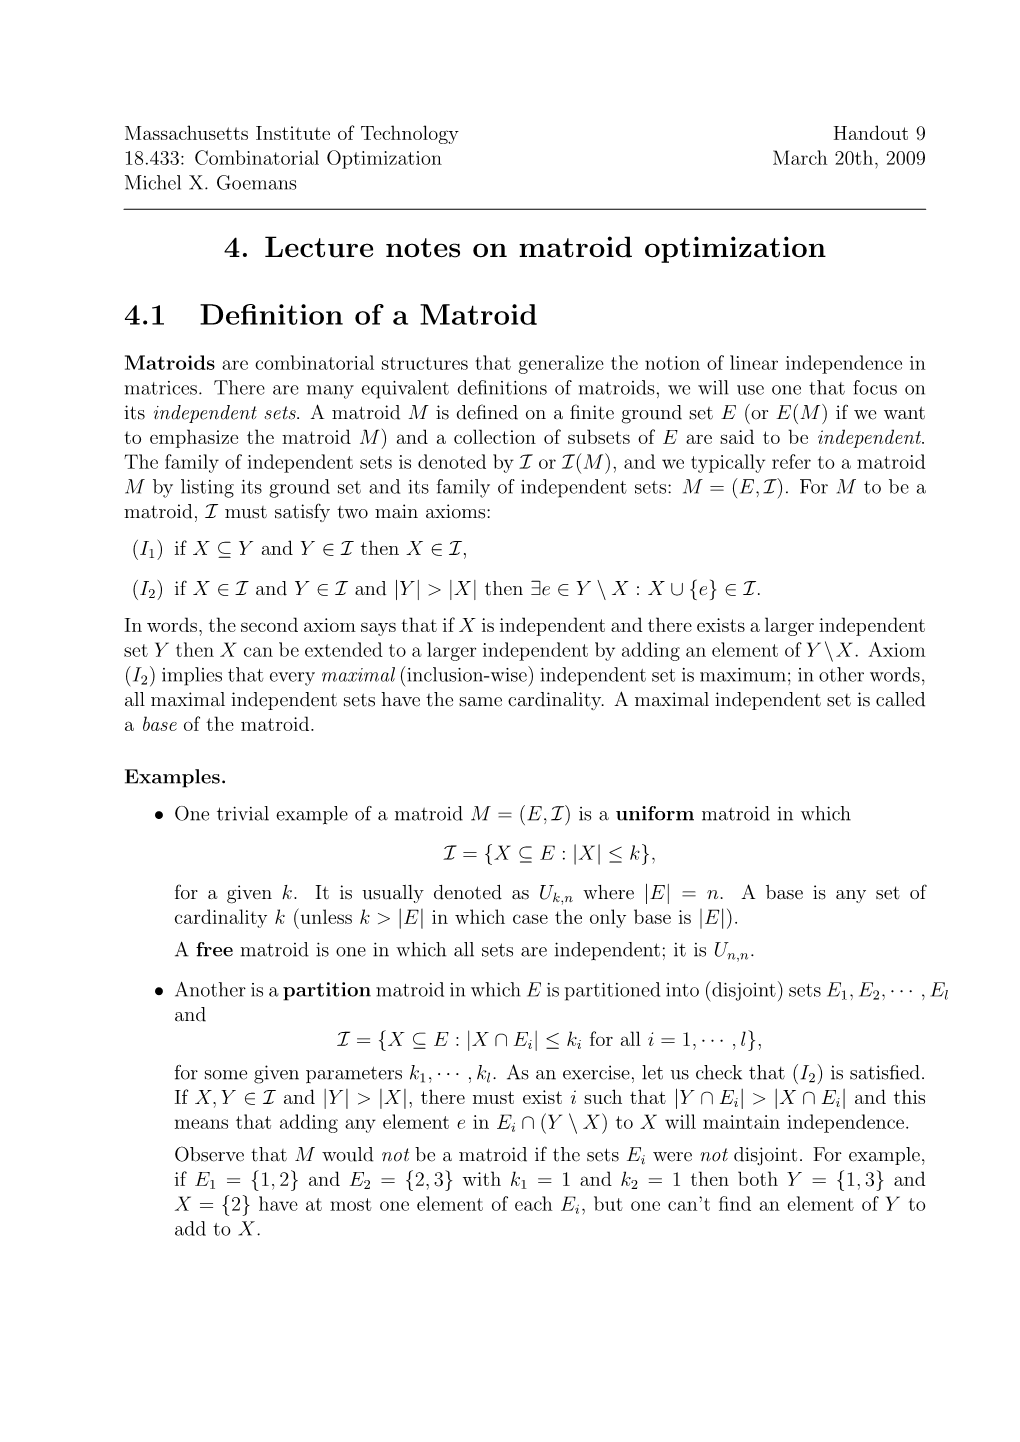 4. Lecture Notes on Matroid Optimization 4.1 Definition of A